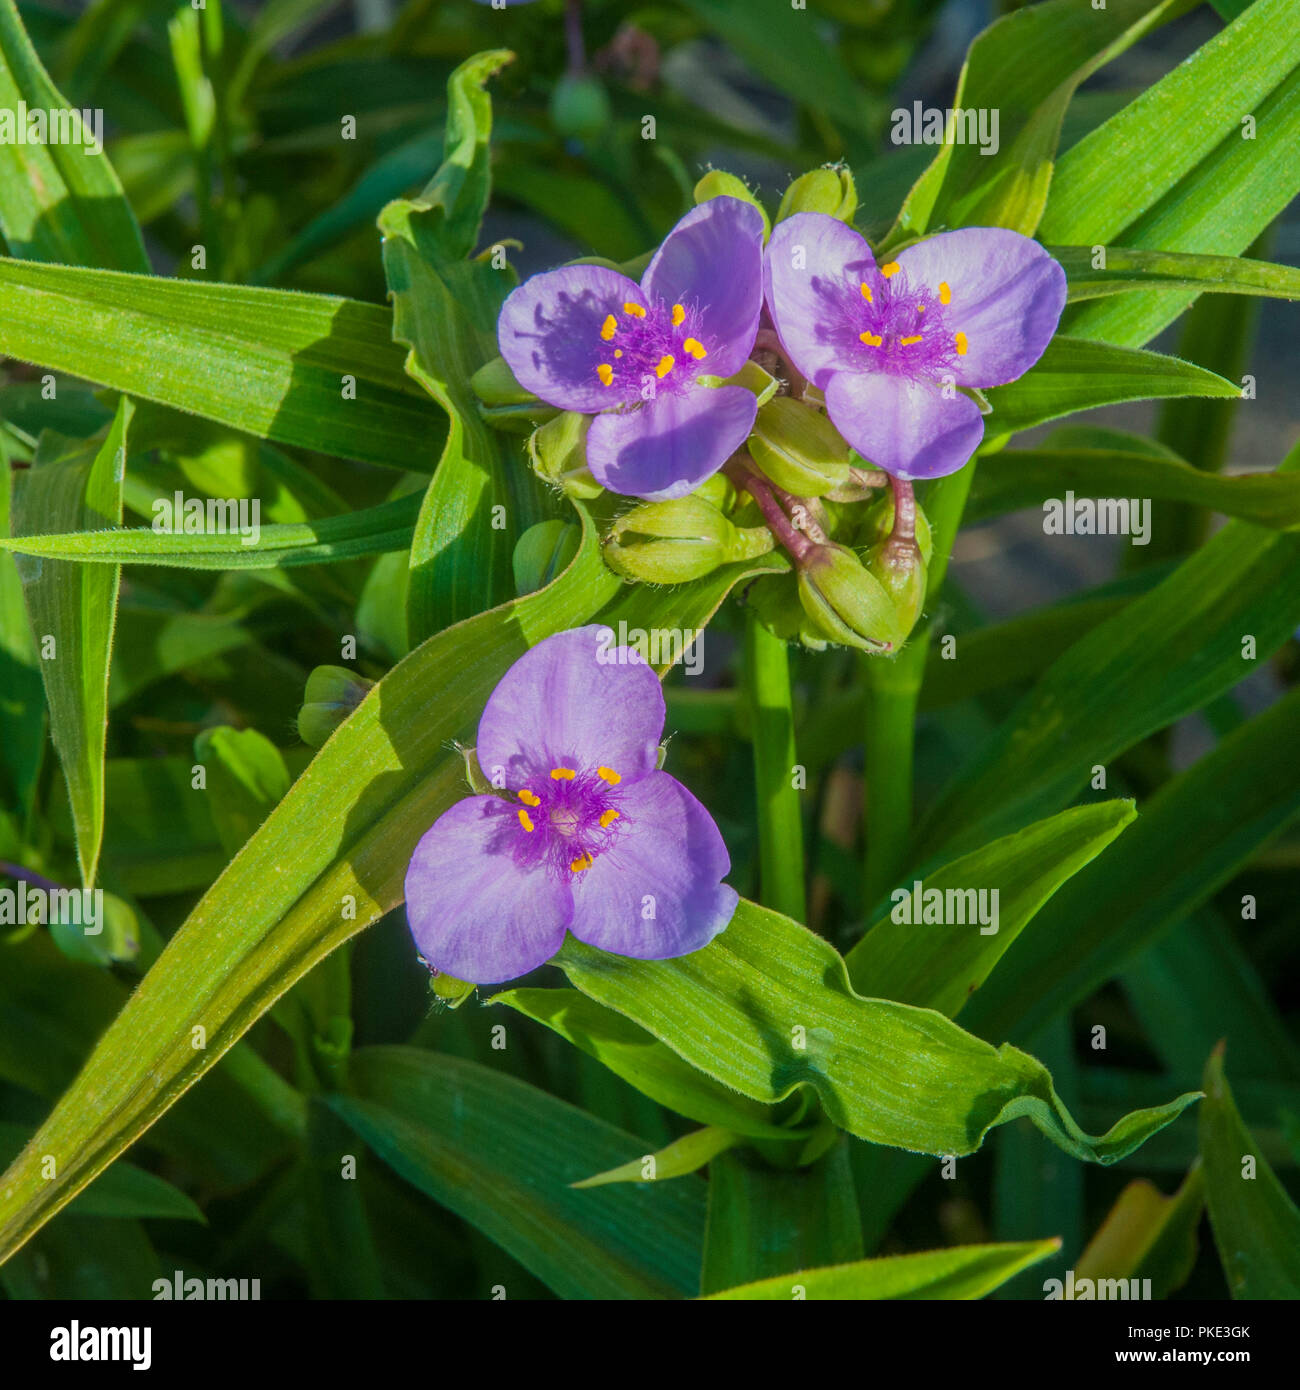 Tradescantia virginiana in a group of three flowers and buds.set against background of leaves. Stock Photo